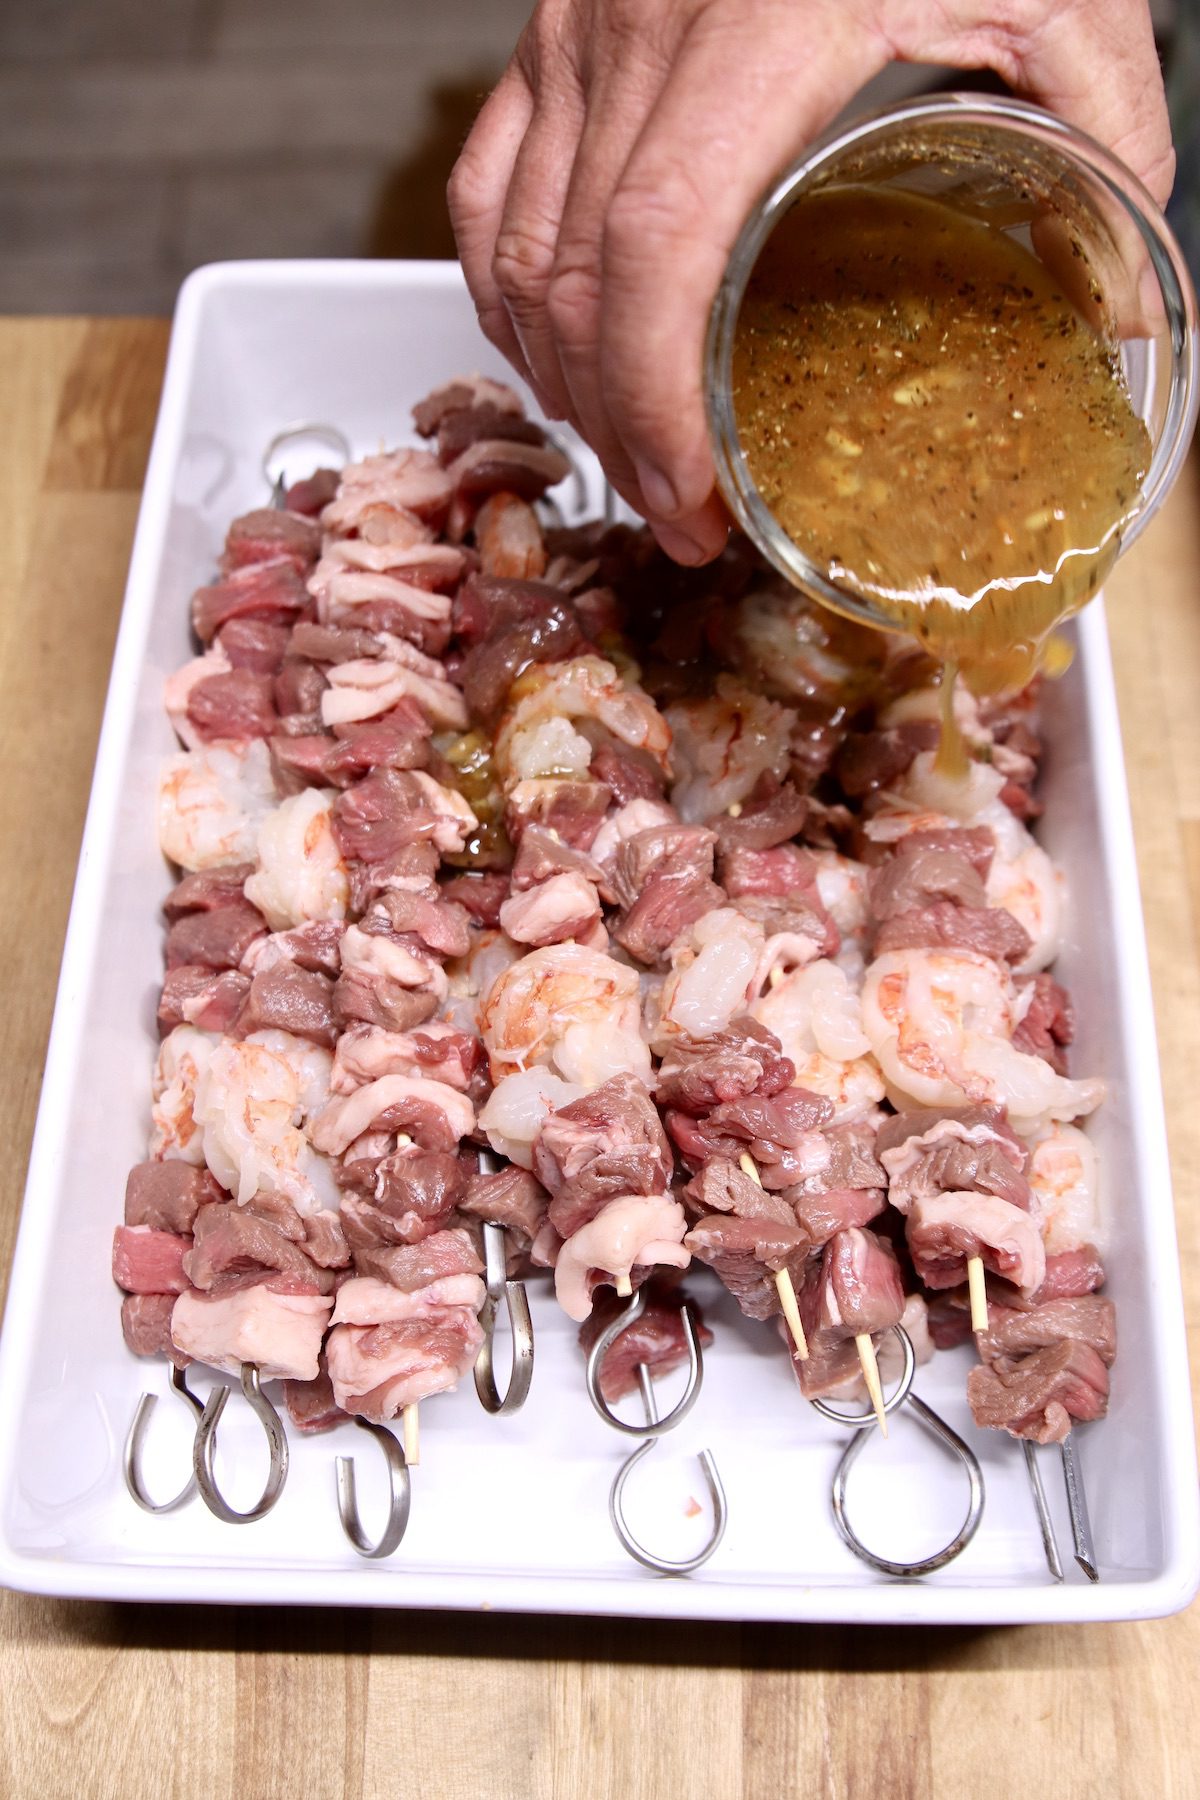 kabobs with steak and shrimp - pouring orange glaze over to marinate